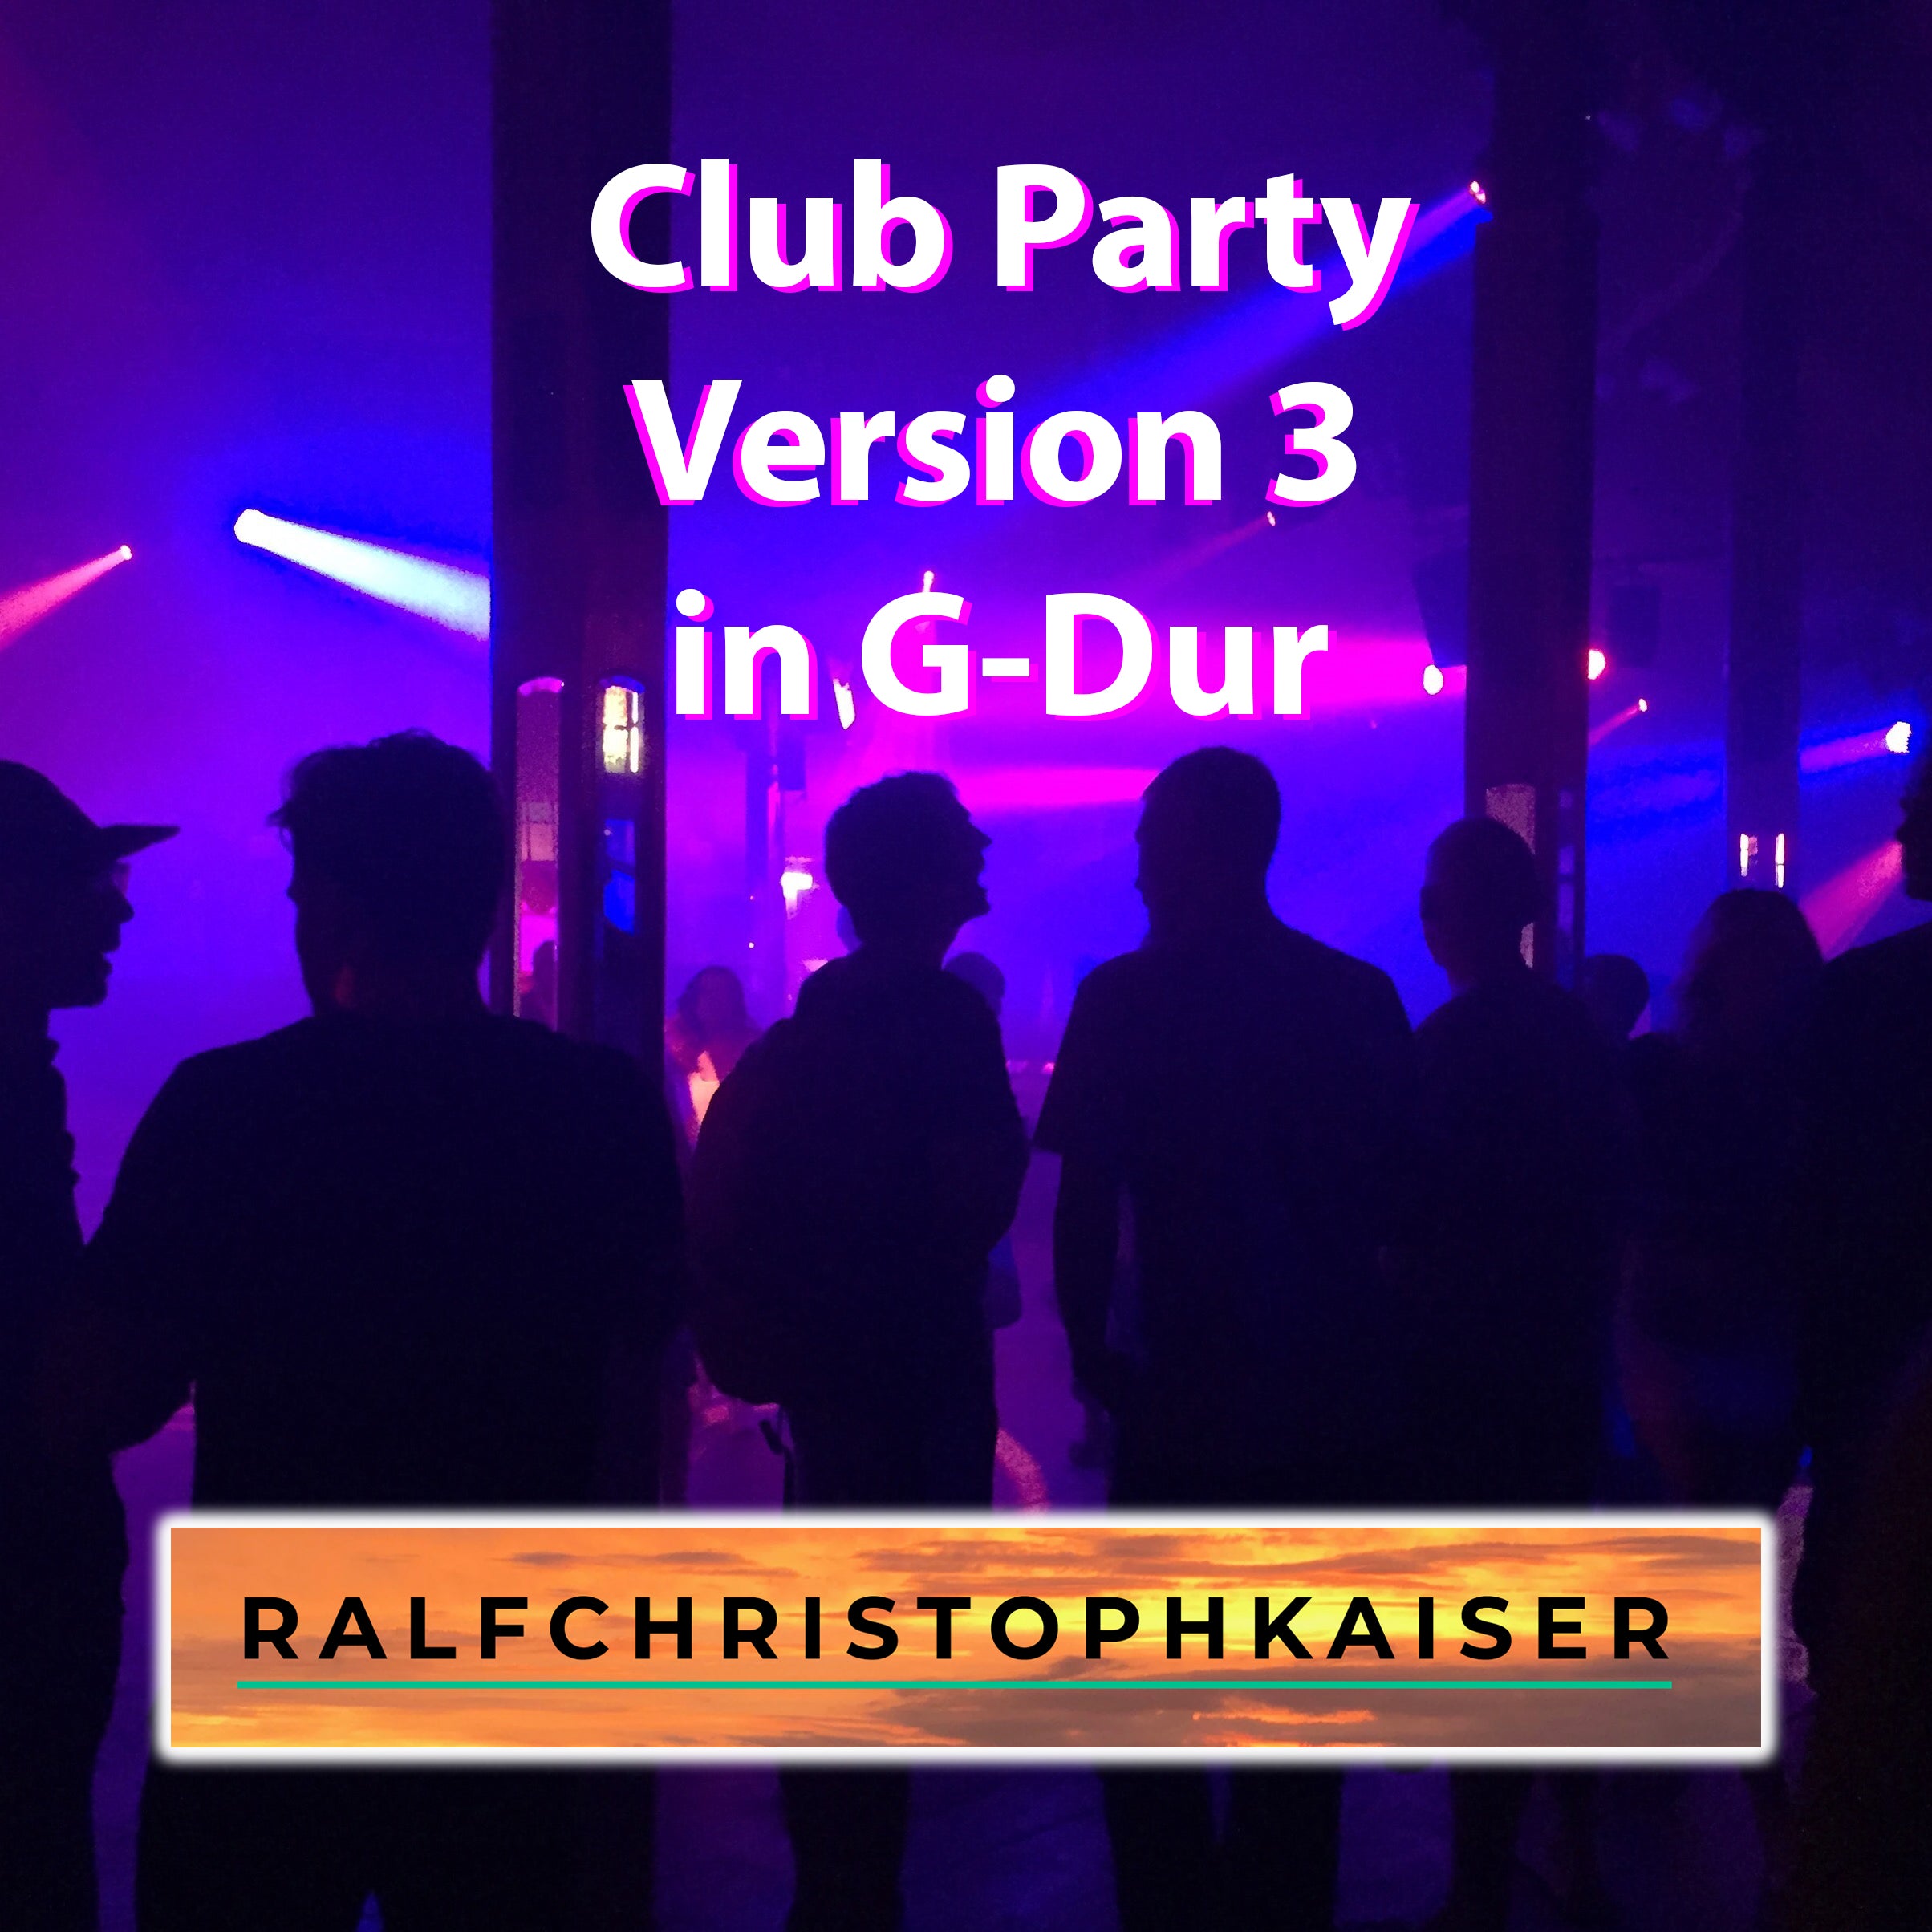 Club Party in G-Dur by Ralf Christoph Kaiser Version 3 Full Score Full Orchestra Leadsheet and Parts - ralfchristophkaiser.com Musik und Noten